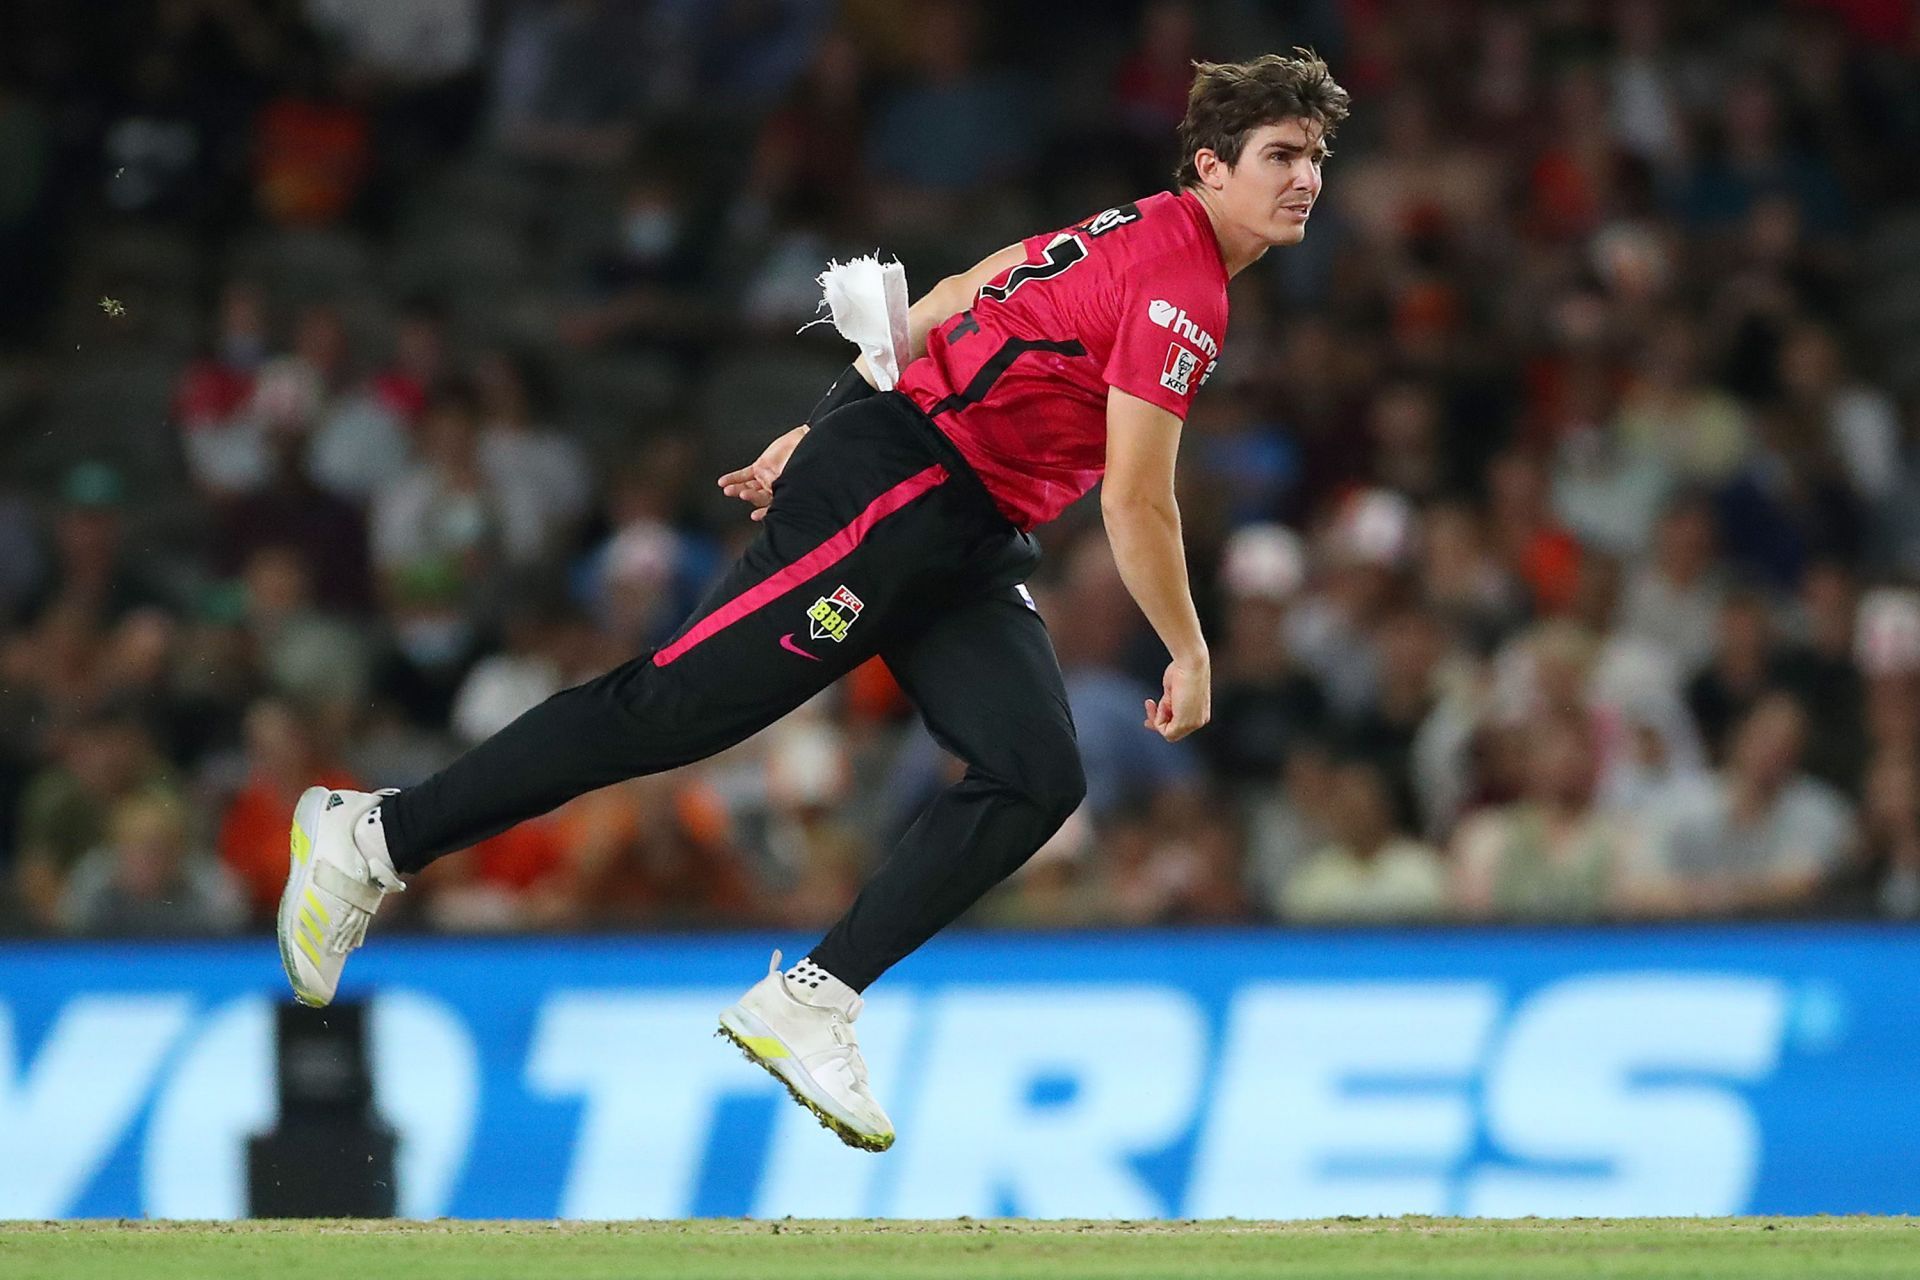 Sean Abbott bowling in the BBL. Pic: Getty Images